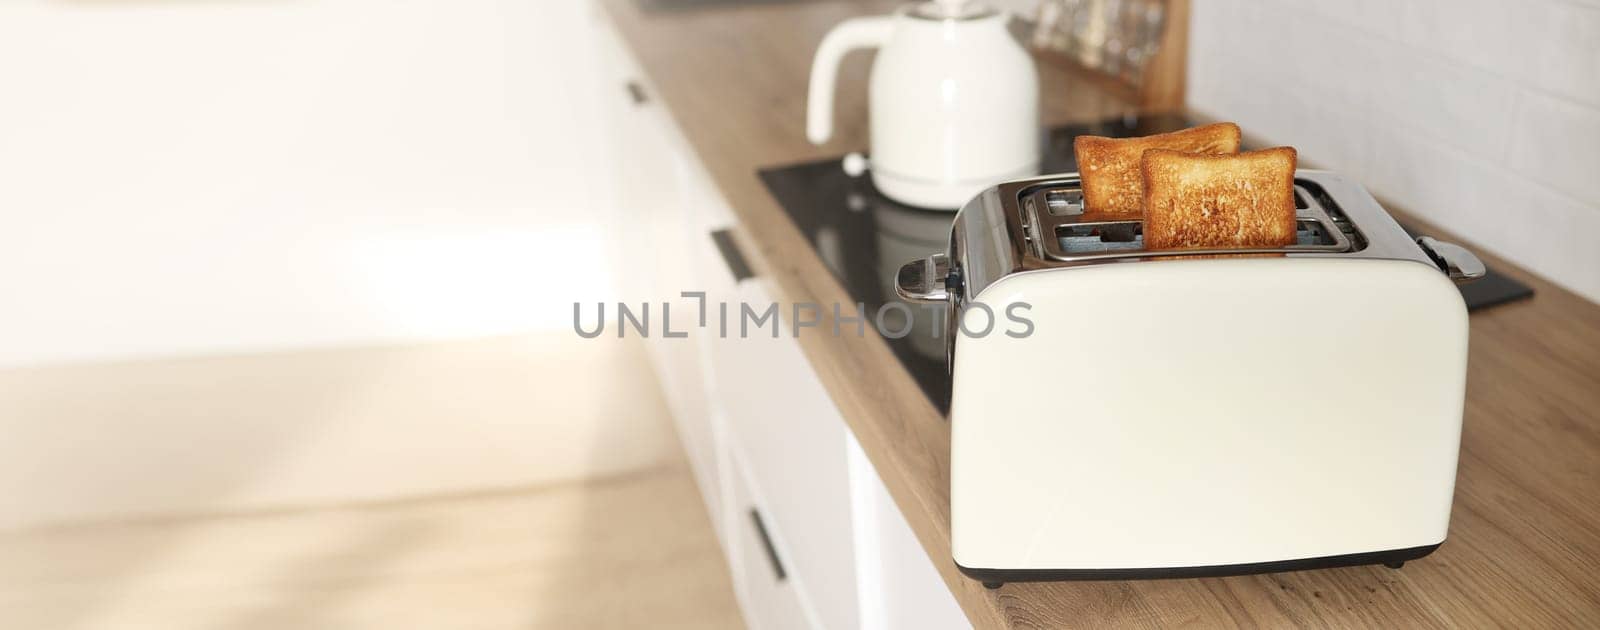 banner of Modern white toaster and roasted bread slices toasts inside on wooden table in kitchen. copy space.